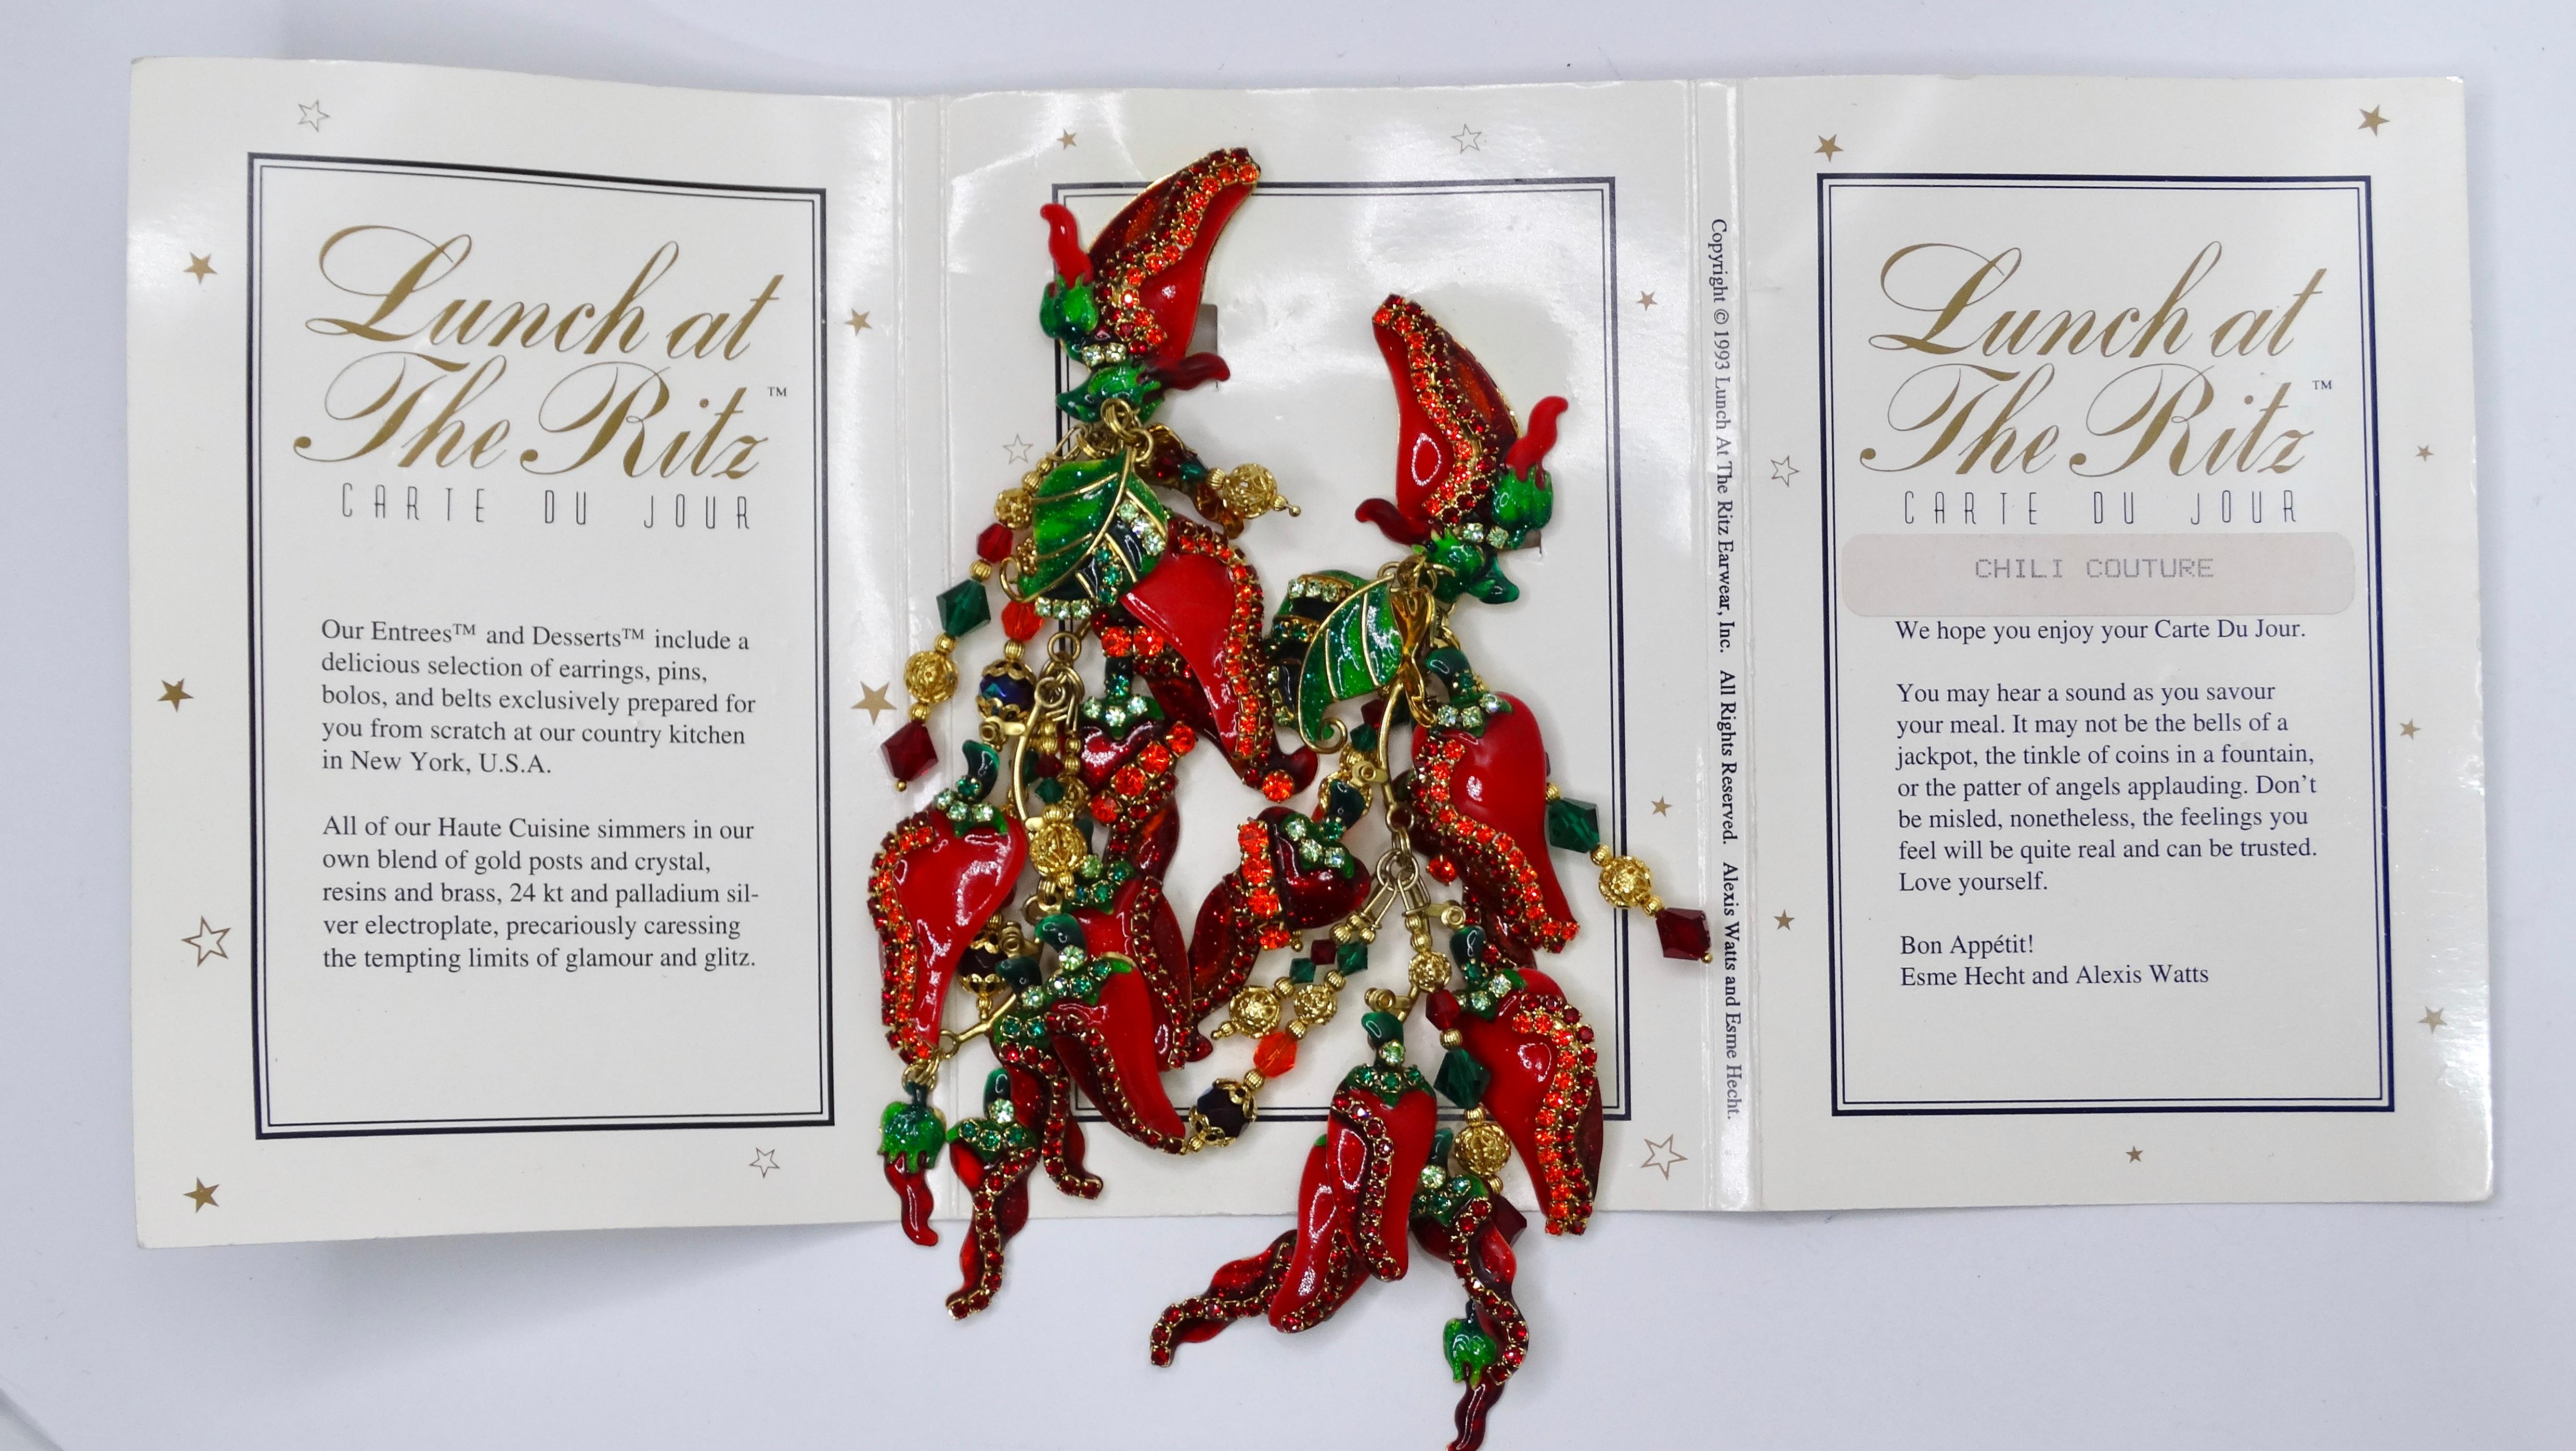 These are the most fun piece of collectible costume jewelry! No one will be able to resist complimenting you on these works of art! Spice up any outfit by bringing out these chili pepper dangling earrings. These are large earrings, with a six inch